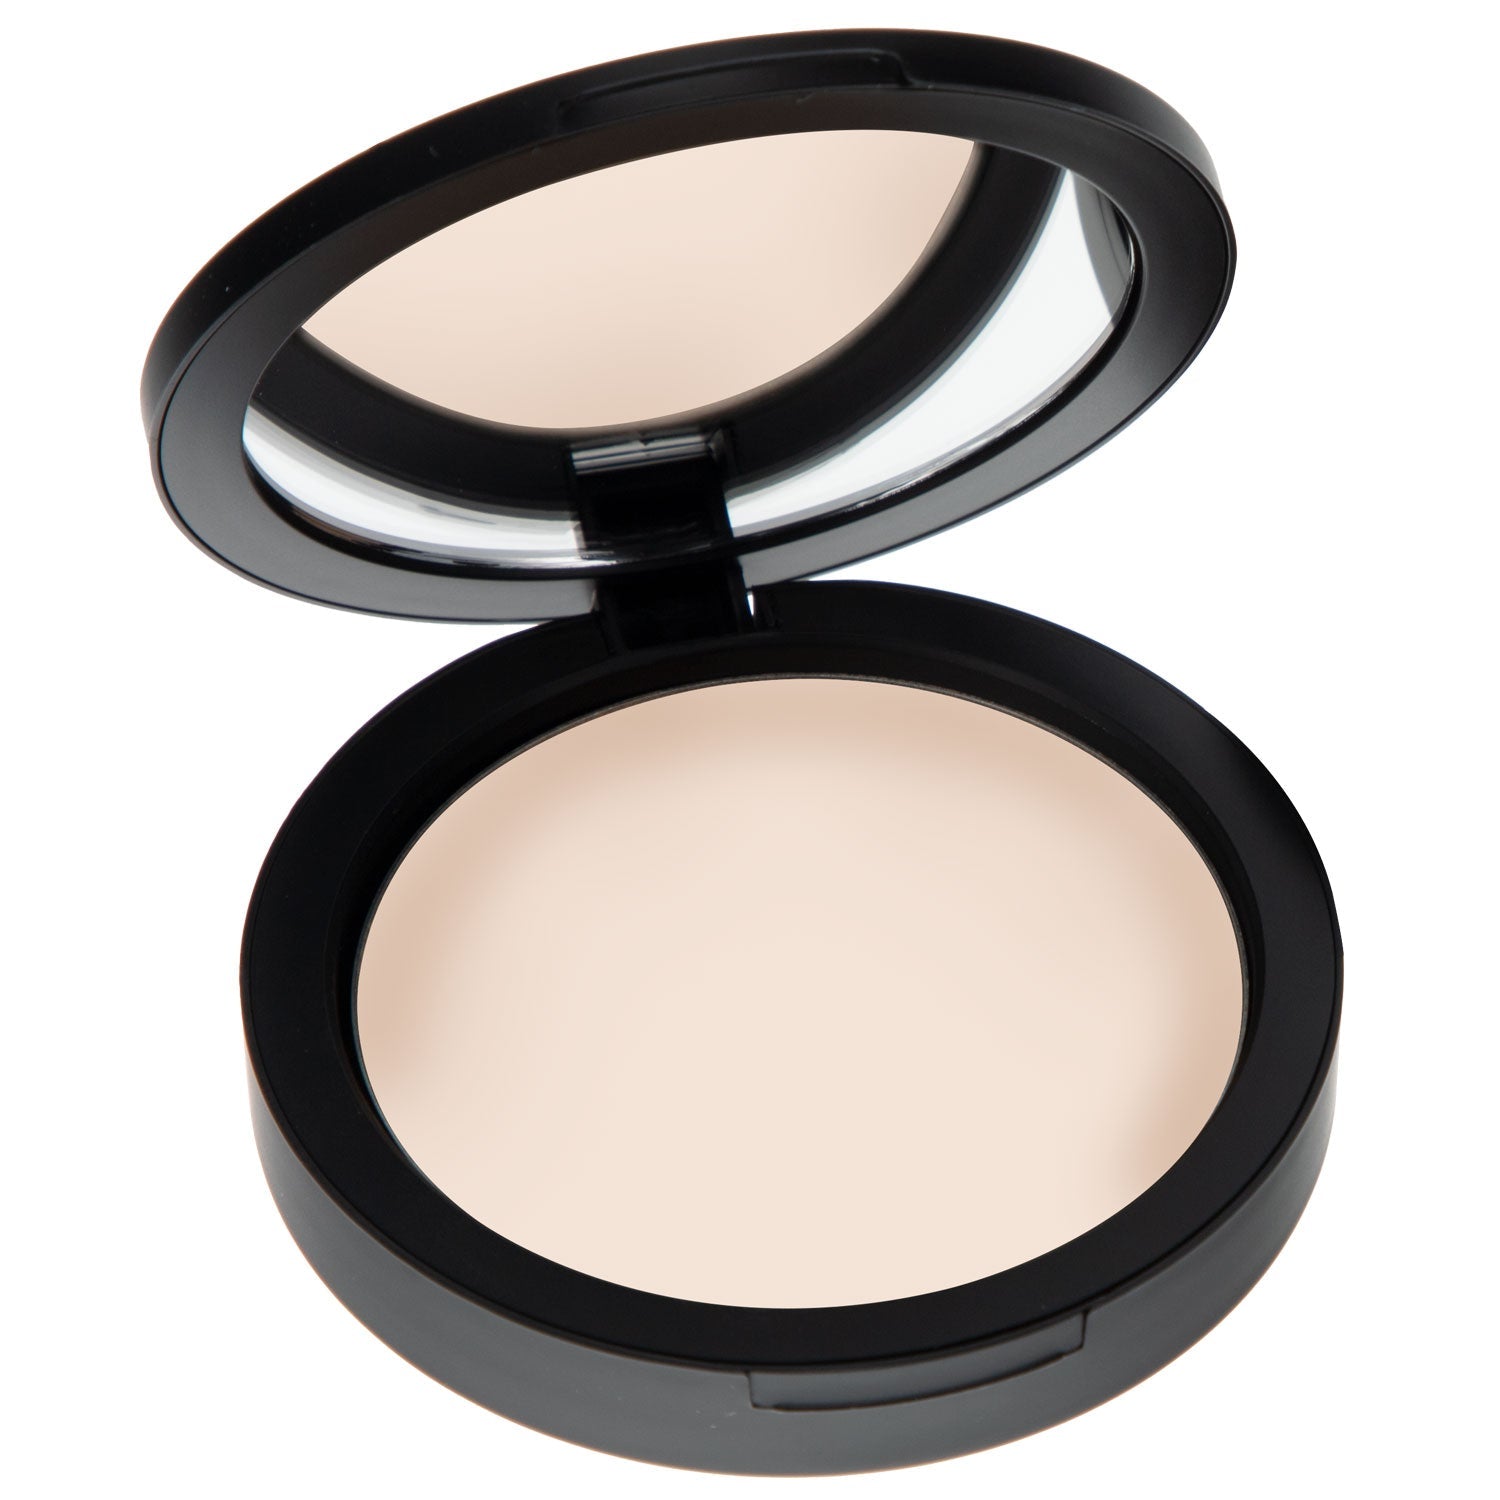 Mineral Based 4-in-1 Product is your PRESSED Powder, Foundation, SPF 15 and Soft Focus Finish All in One! No loose powder mess! Formulated without talc, gluten, phthalates, fragrance, GMO, parabens, or corn.  LULLABY (Light) - For porcelain to very fair complexions.